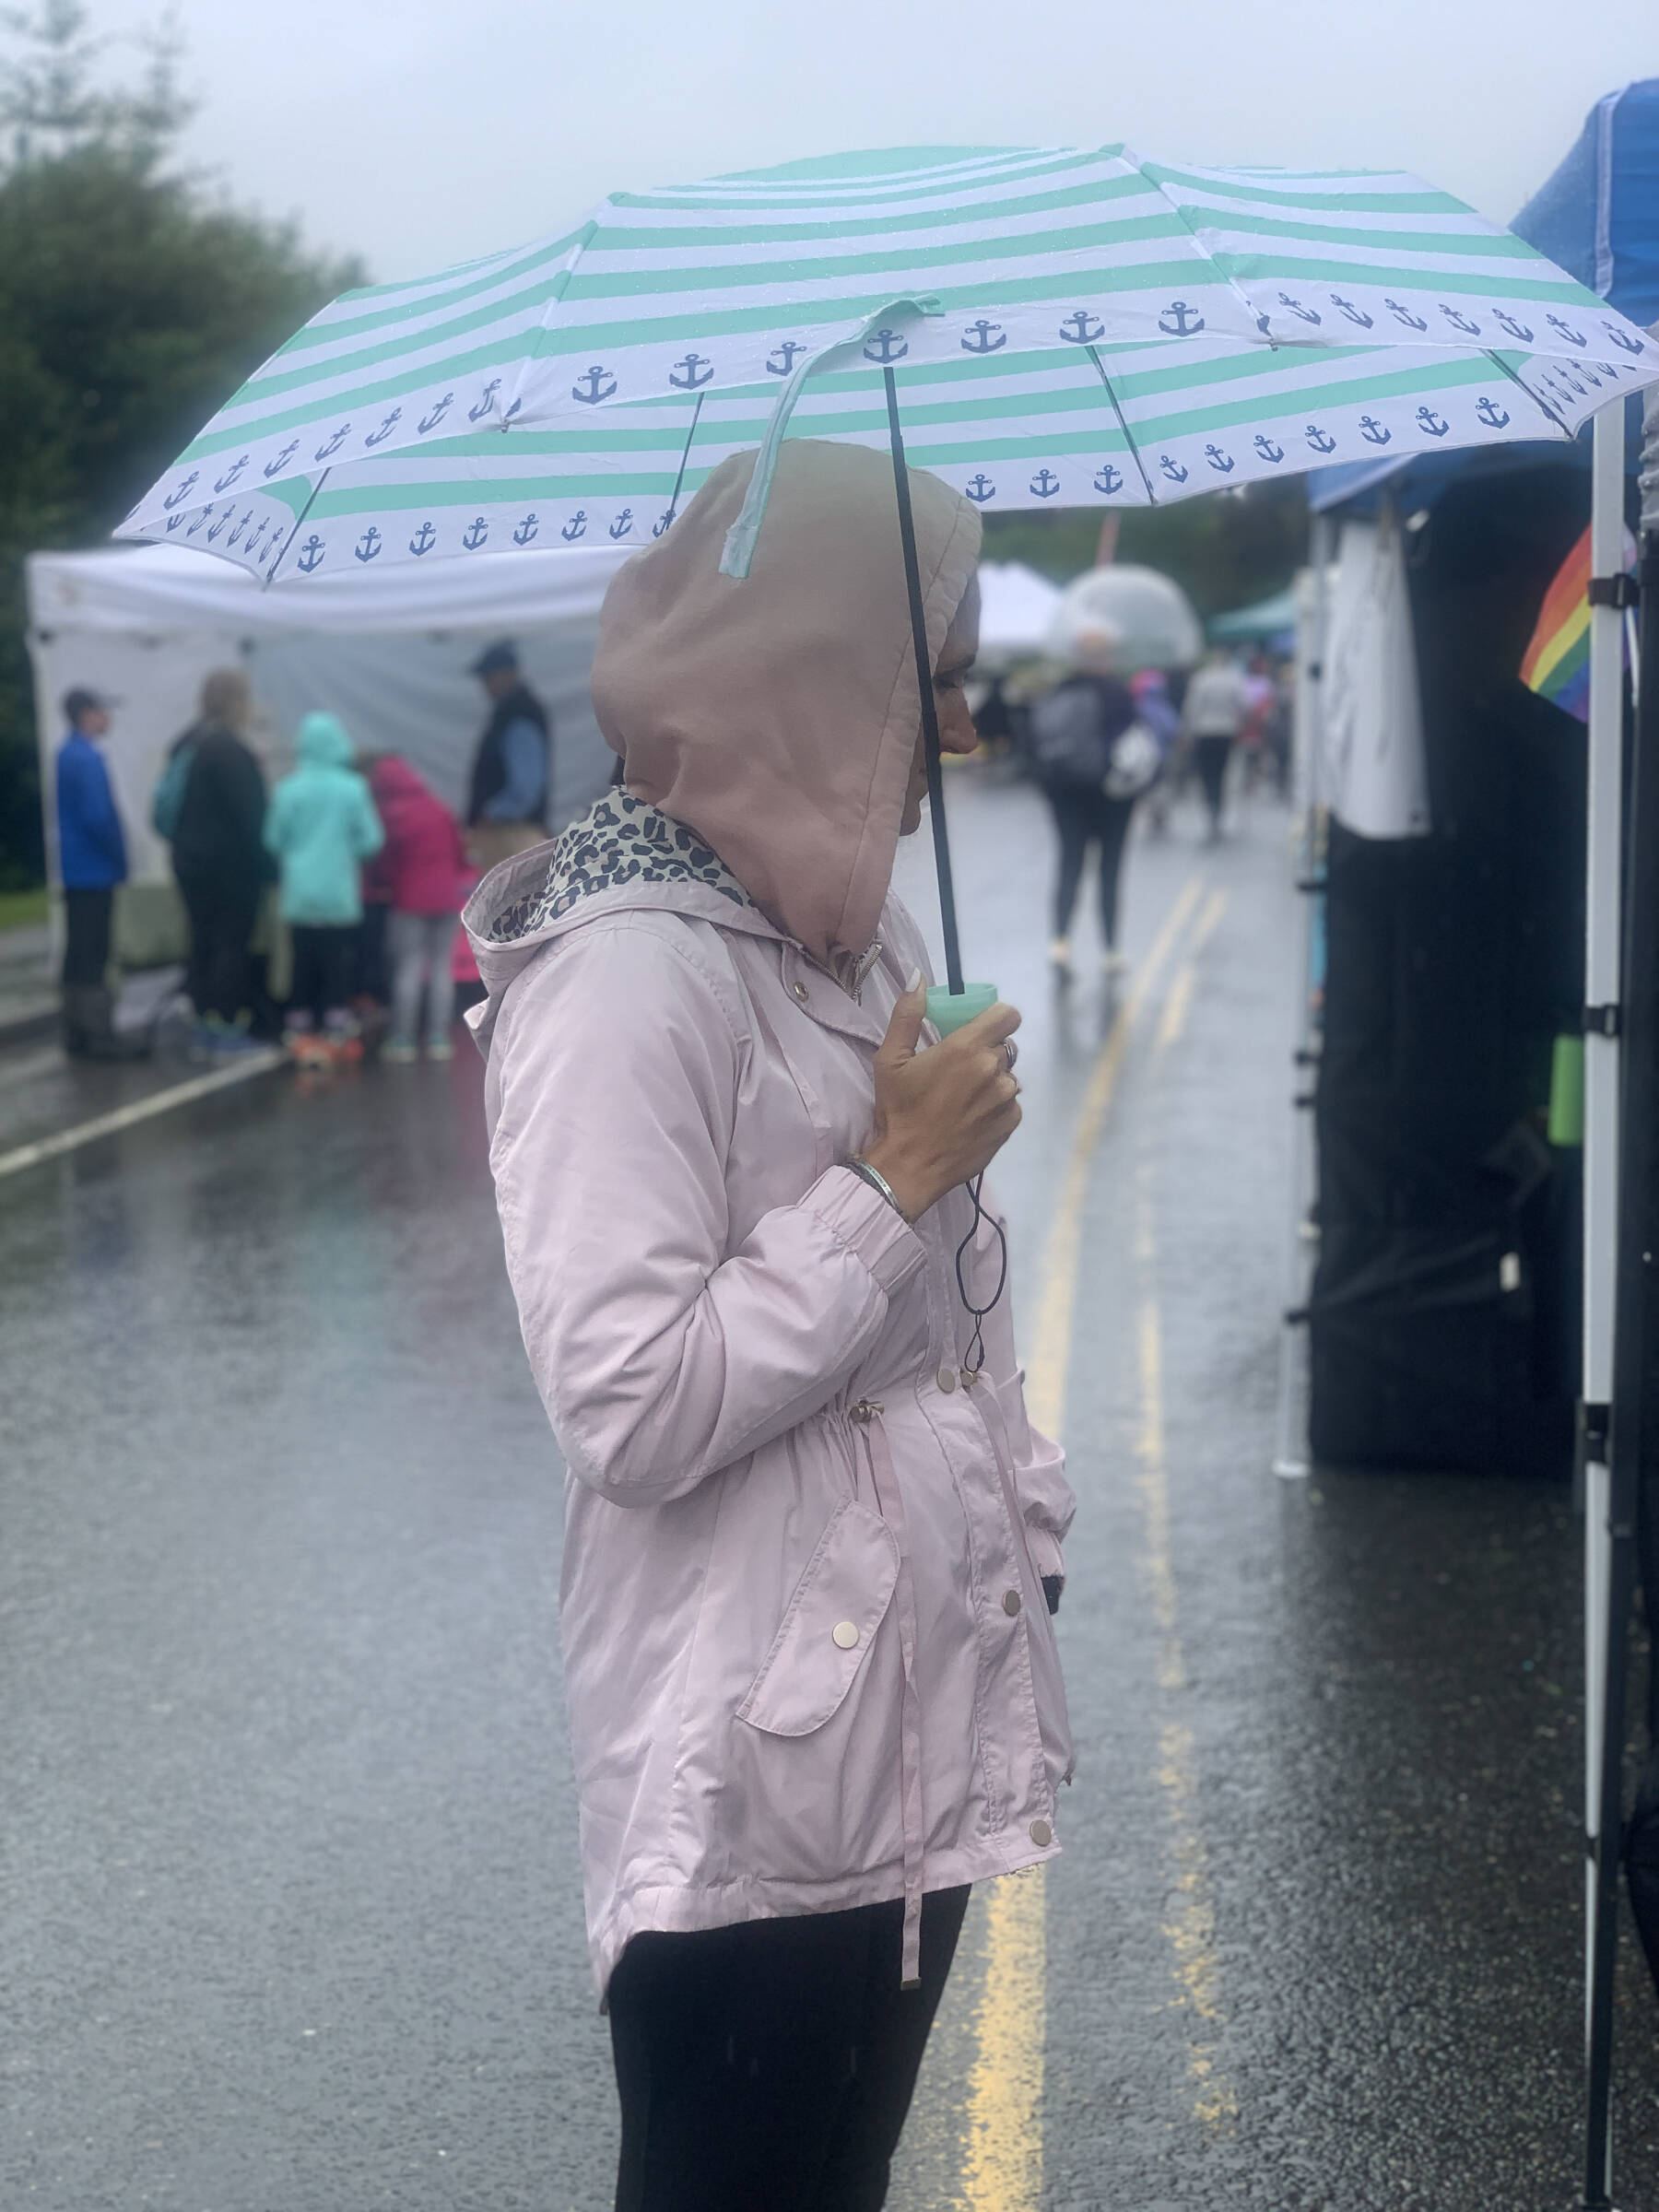 Rainy conditions didn’t keep people away from enjoying the first annual Summer Solstice Fair held on Wednesday, June 21, 2023 between Safeway and the Homer Public Library in Homer, Alaska. Photo by Christina Whiting